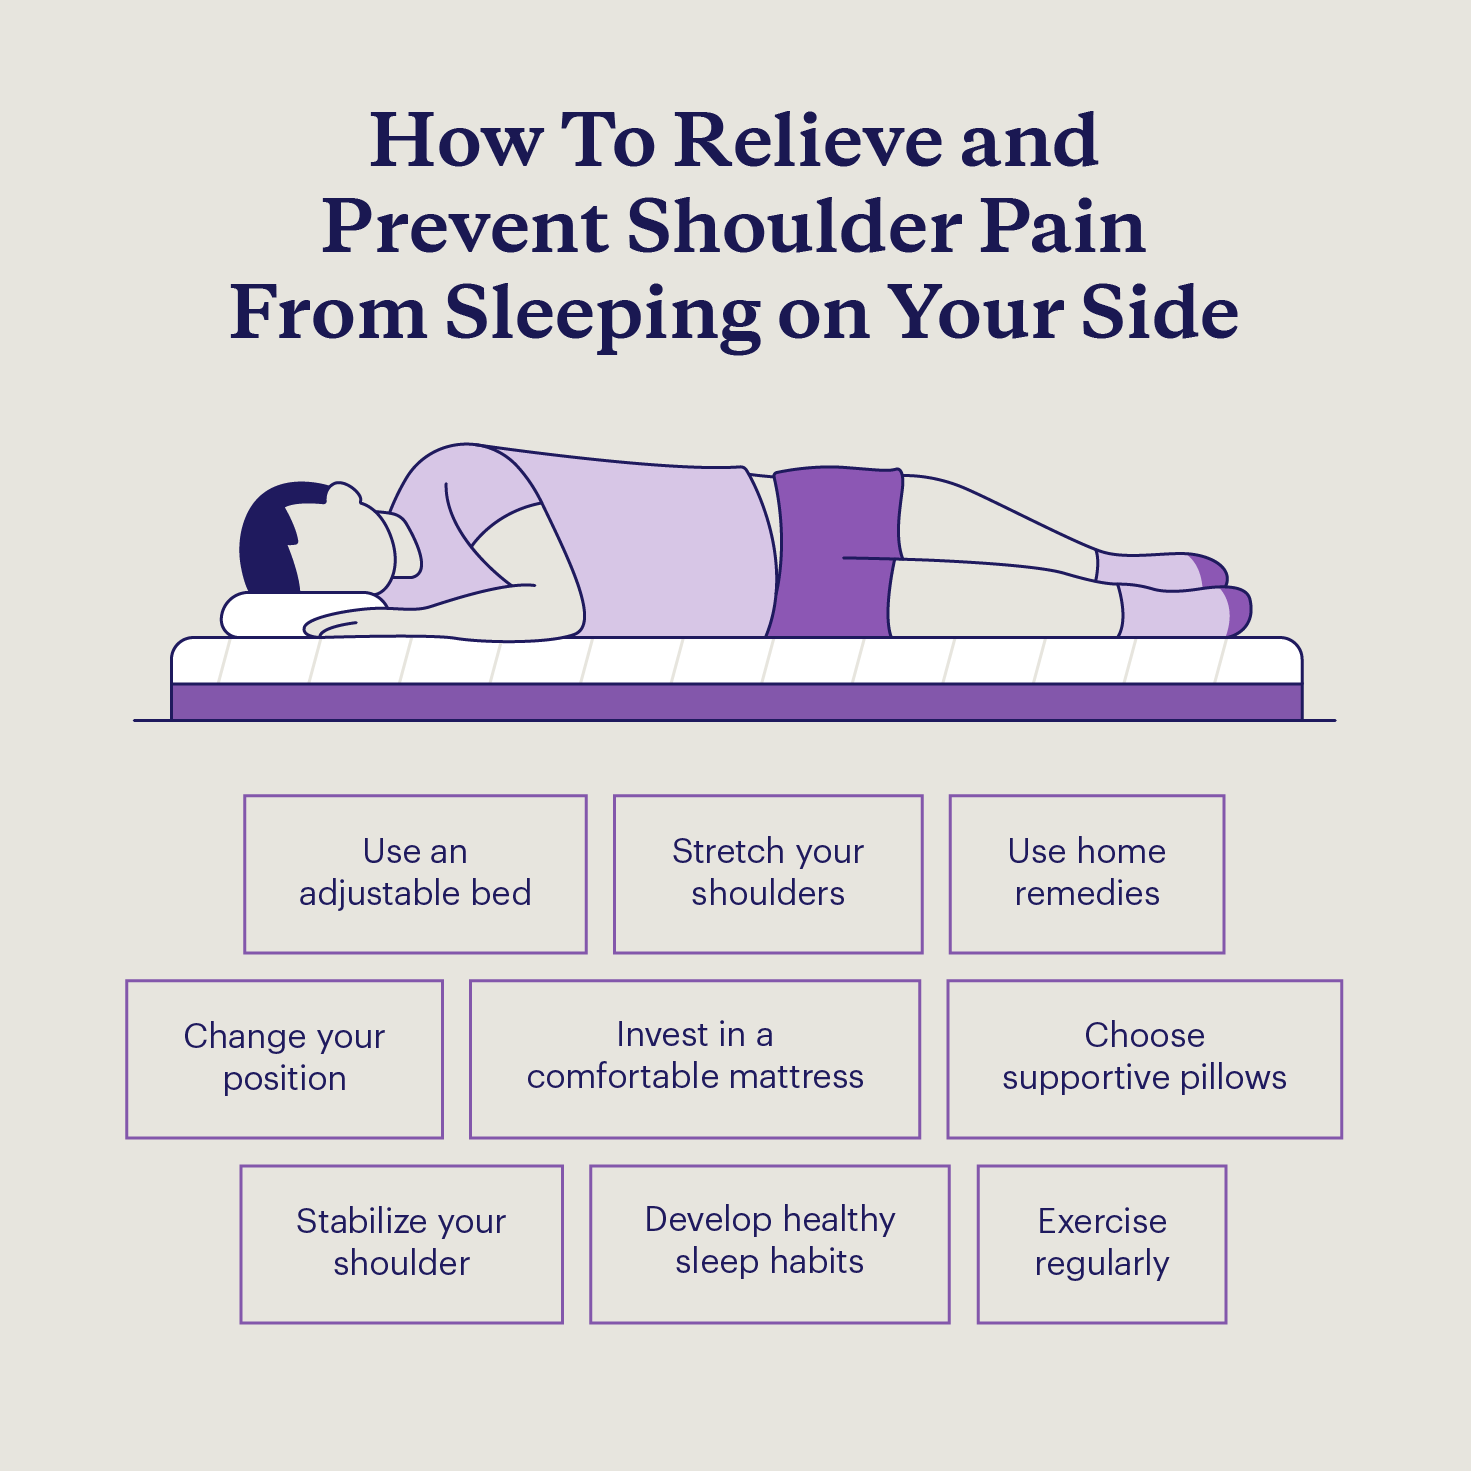 Eight ways to prevent or relieve shoulder pain from sleeping on your side.